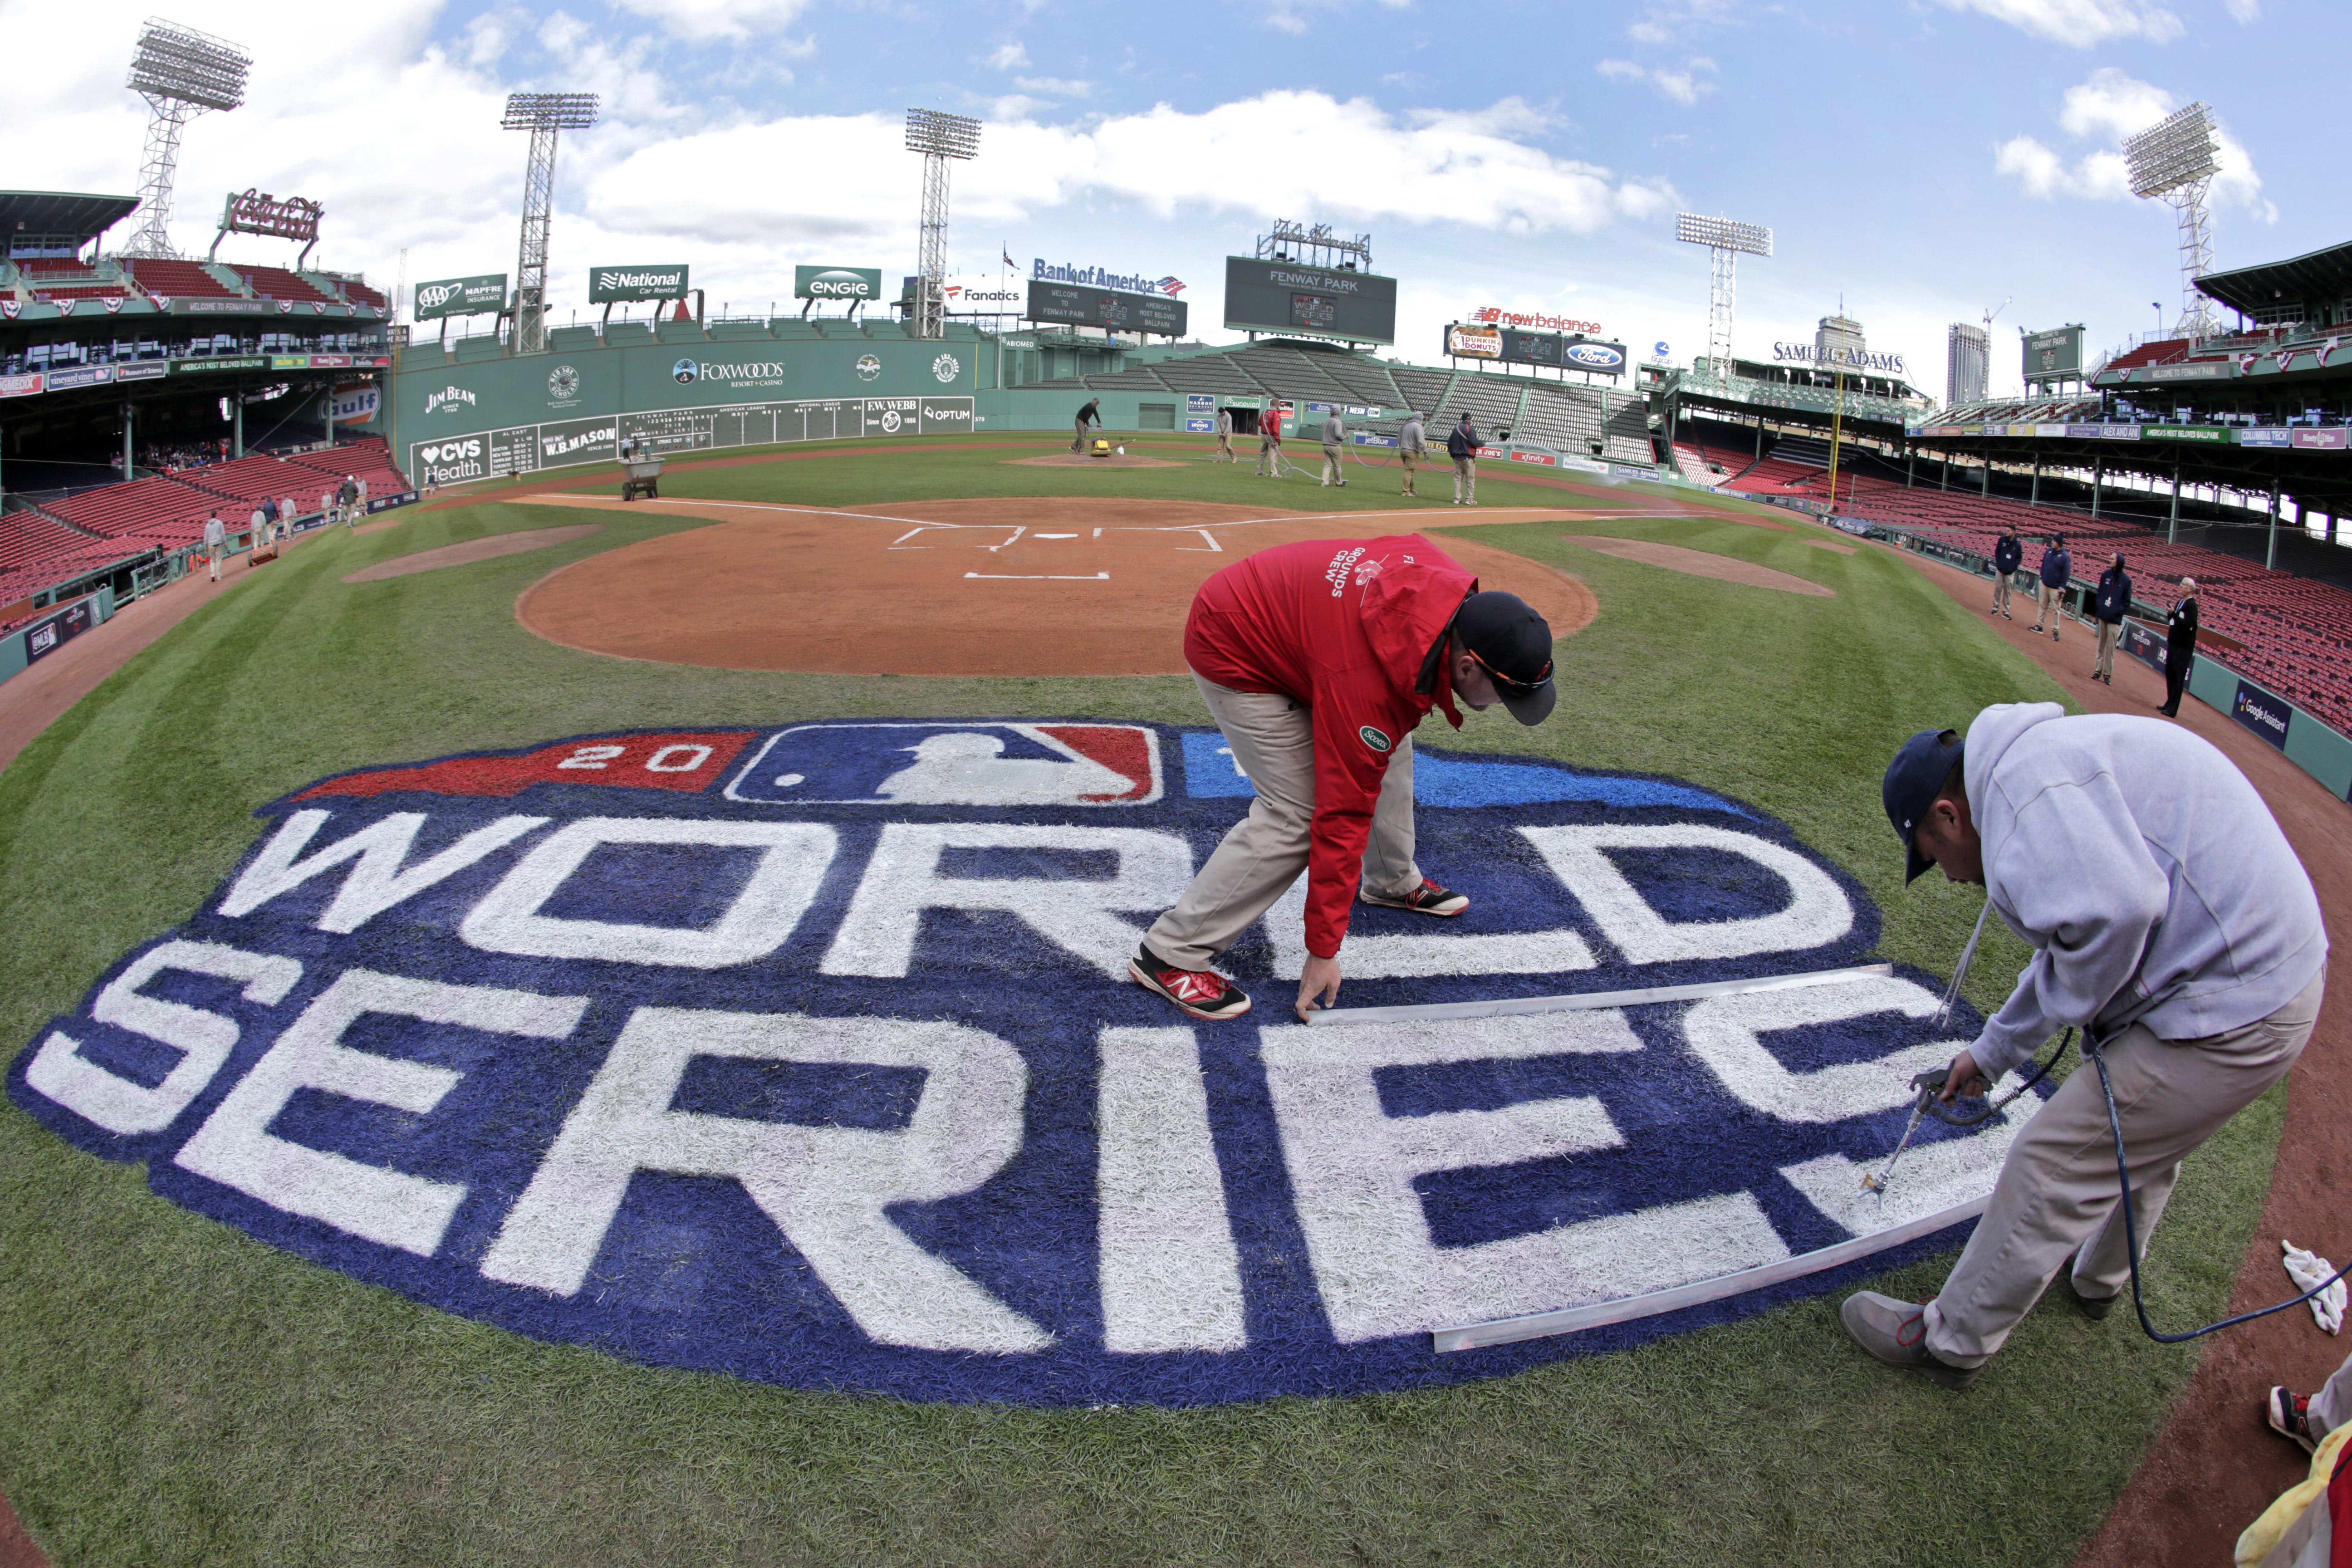 Grounds crew members paint the World Series logo behind home plate at Fenway Park, Sunday, Oct. 21, 2018, in Boston as they prepare for Game 1 of the baseball World Series between the Boston Red Sox and the Los Angeles Dodgers scheduled for Tuesday.